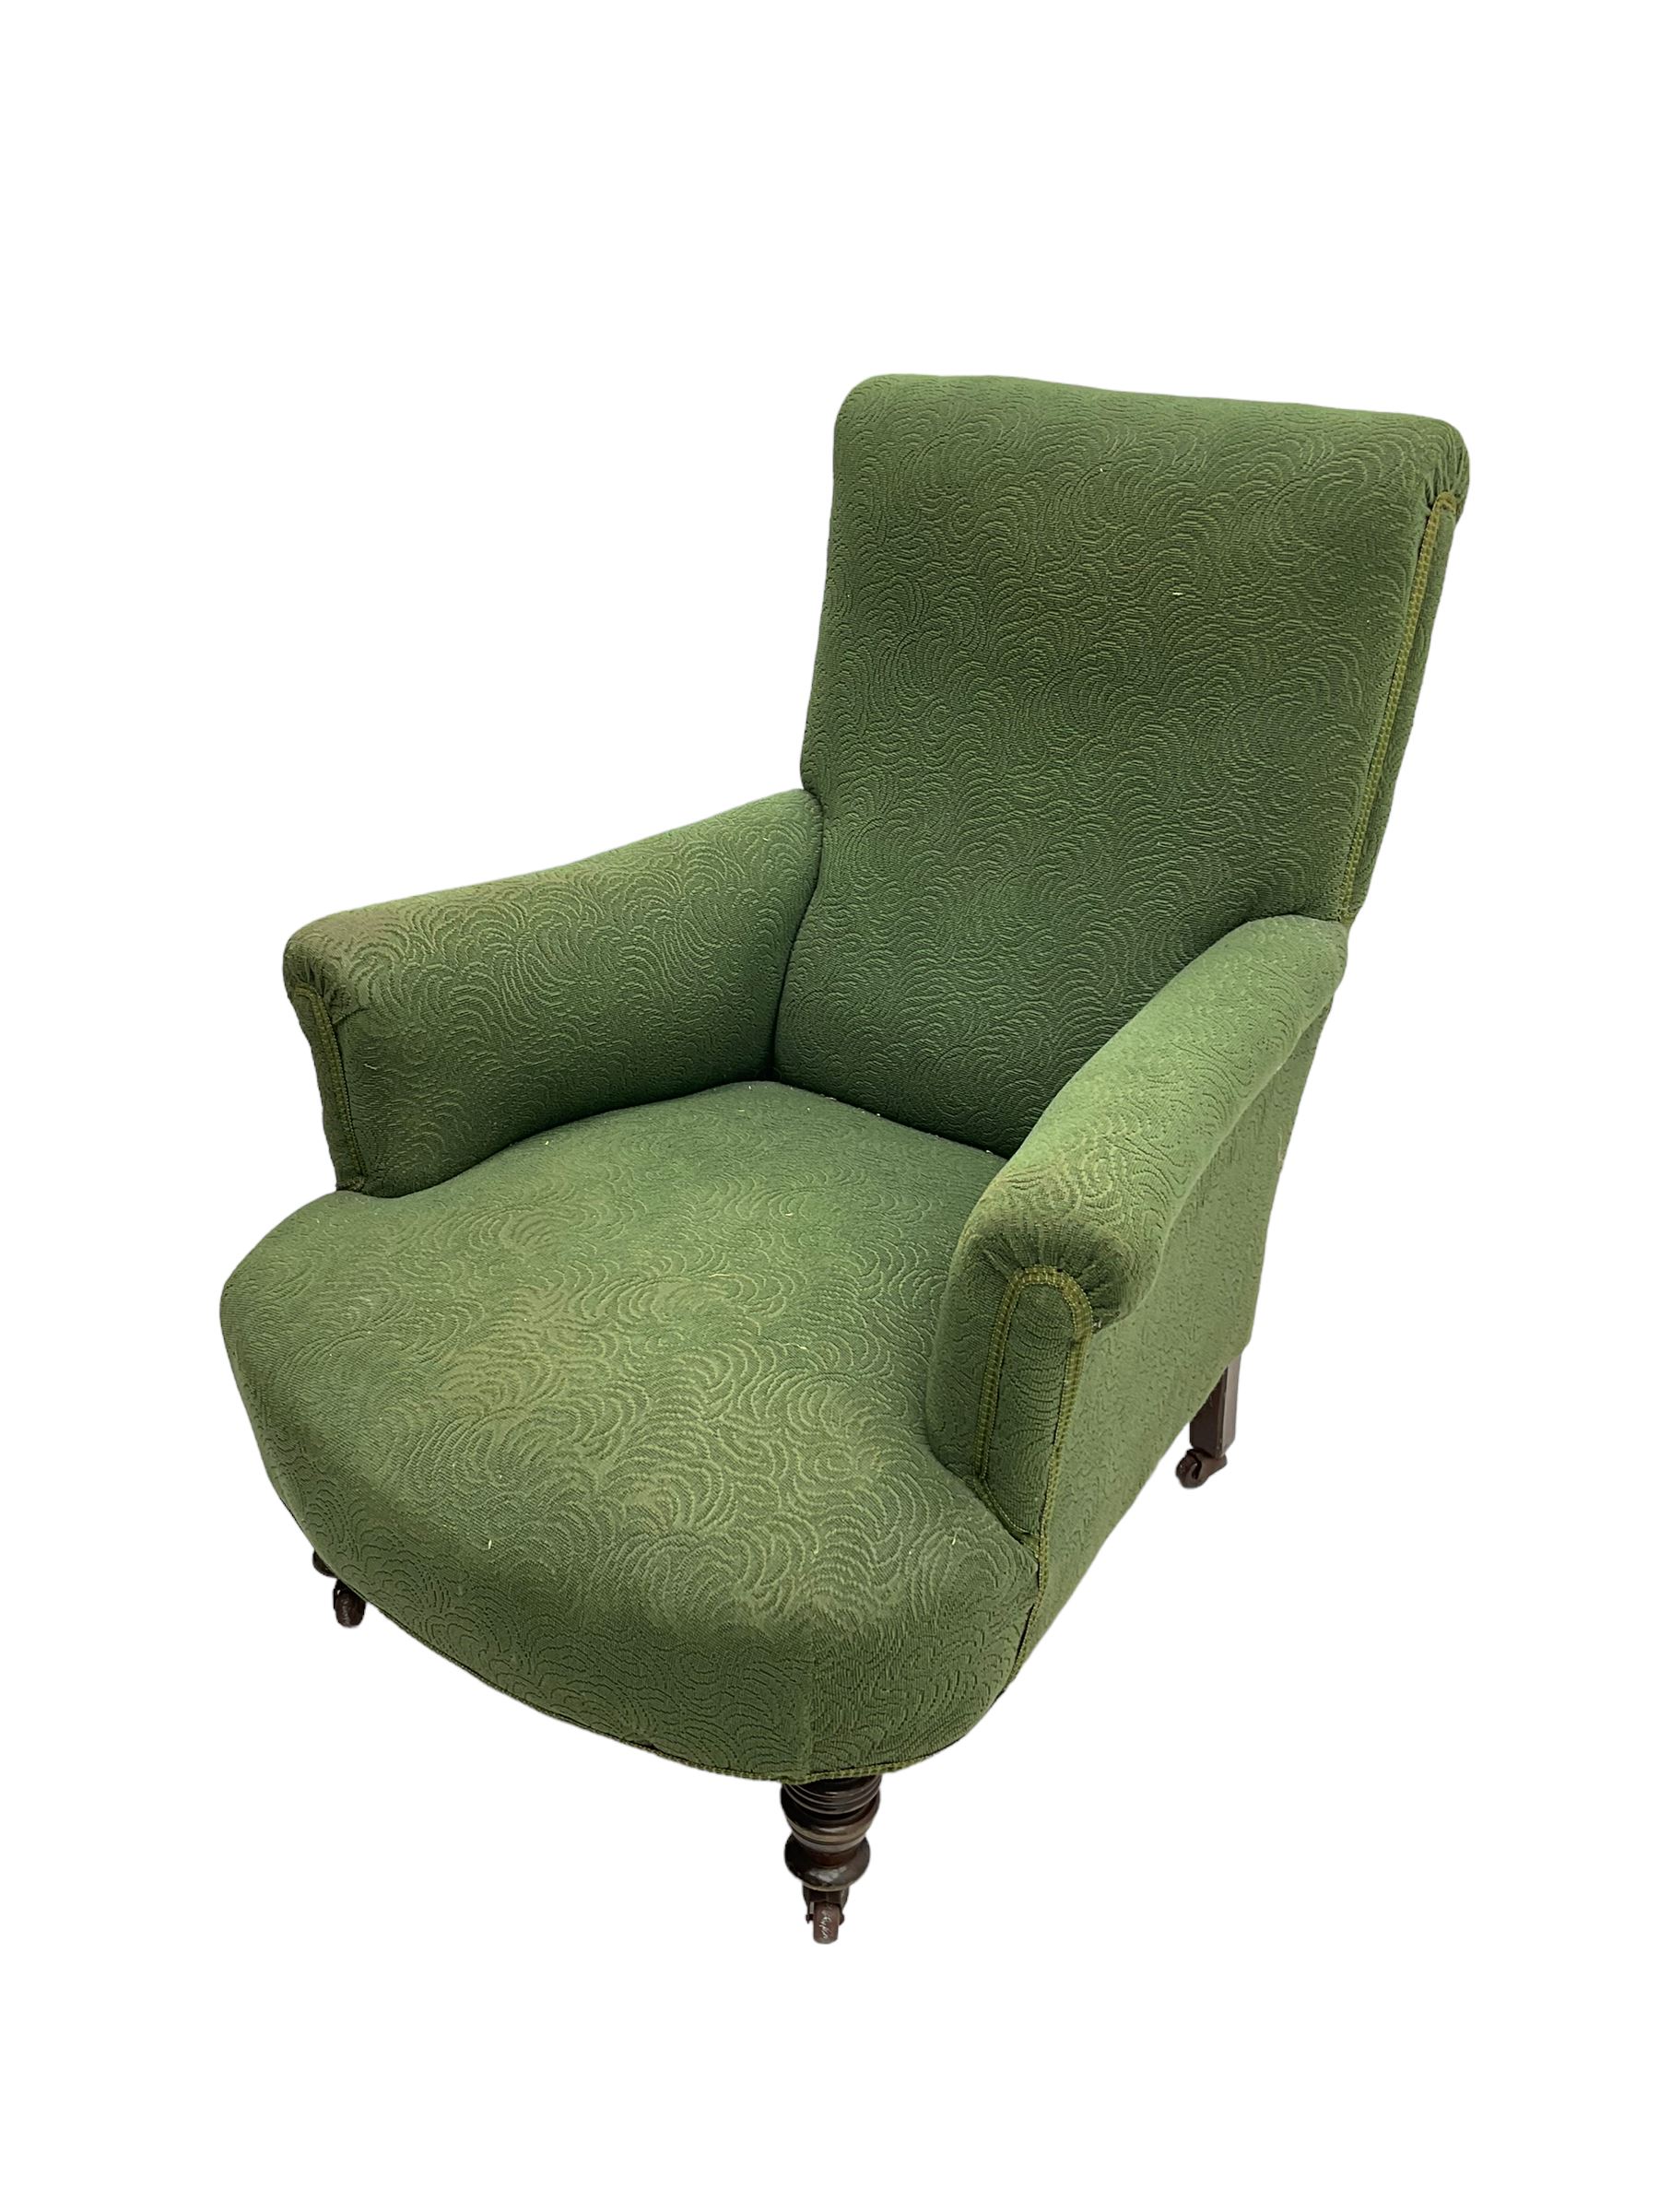 Victorian armchair - Image 5 of 7